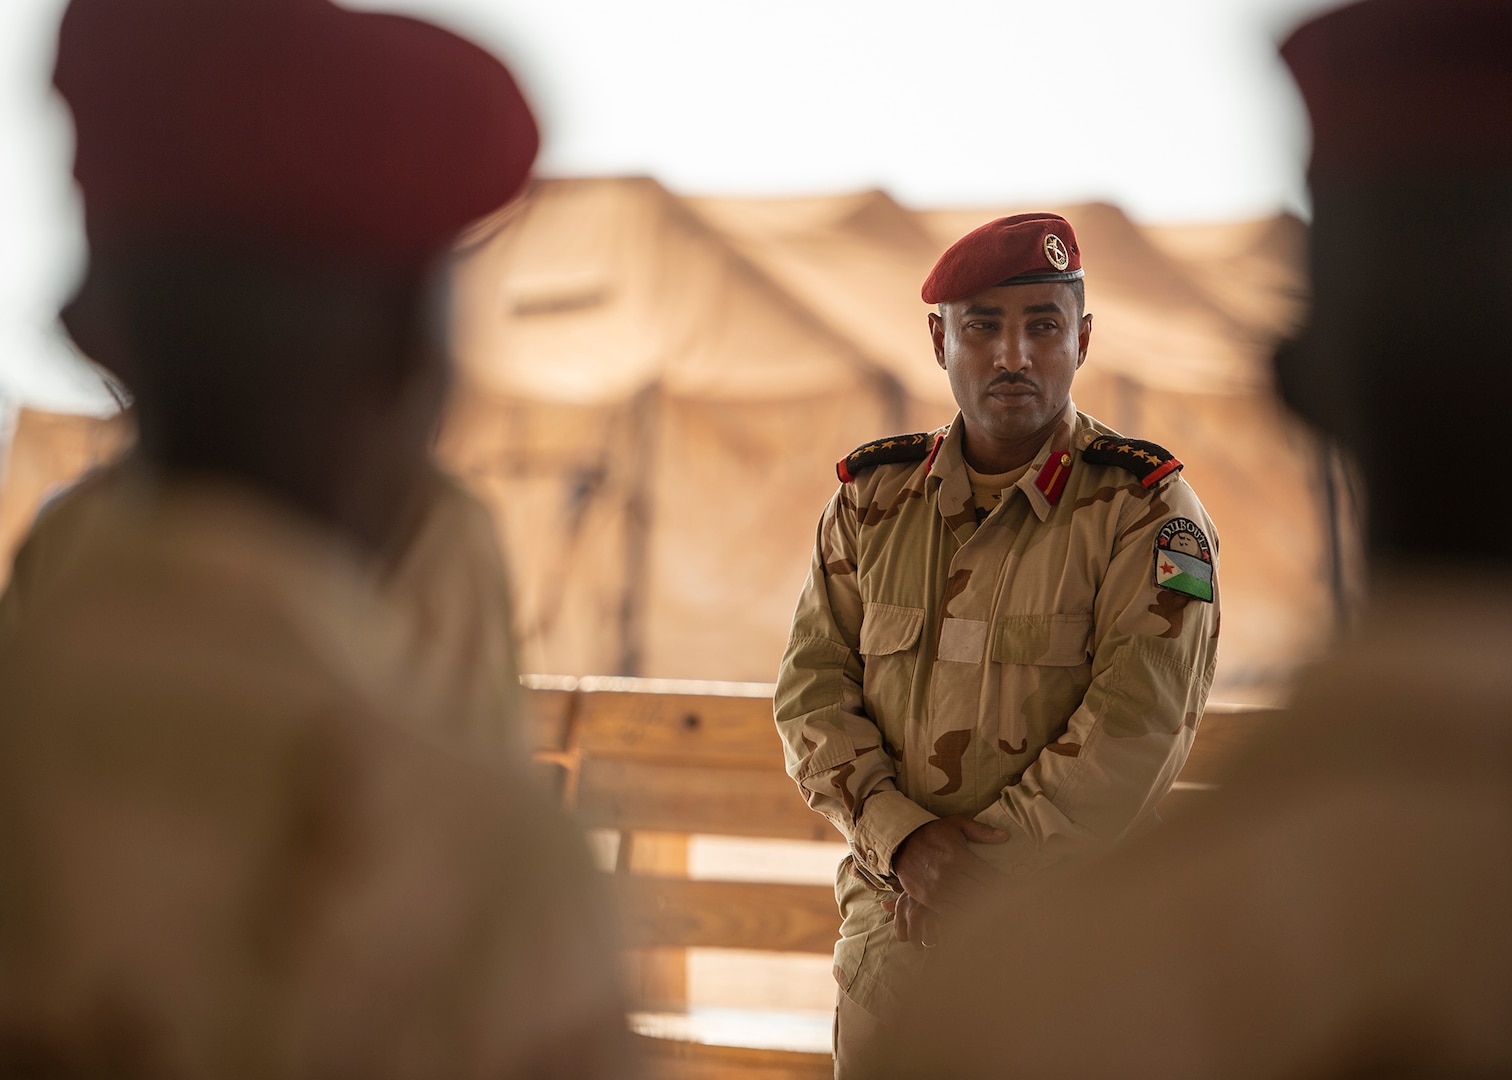 Djiboutian army commander of elite military force Rapid Intervention Battalion listens during course graduation, taught by U.S. Soldiers with 1-26 Infantry Battalion, 2nd Brigade Combat Team, 101st Airborne, at training location near Djibouti, March 7, 2019 (U.S. Air Force/Shawn Nickel)